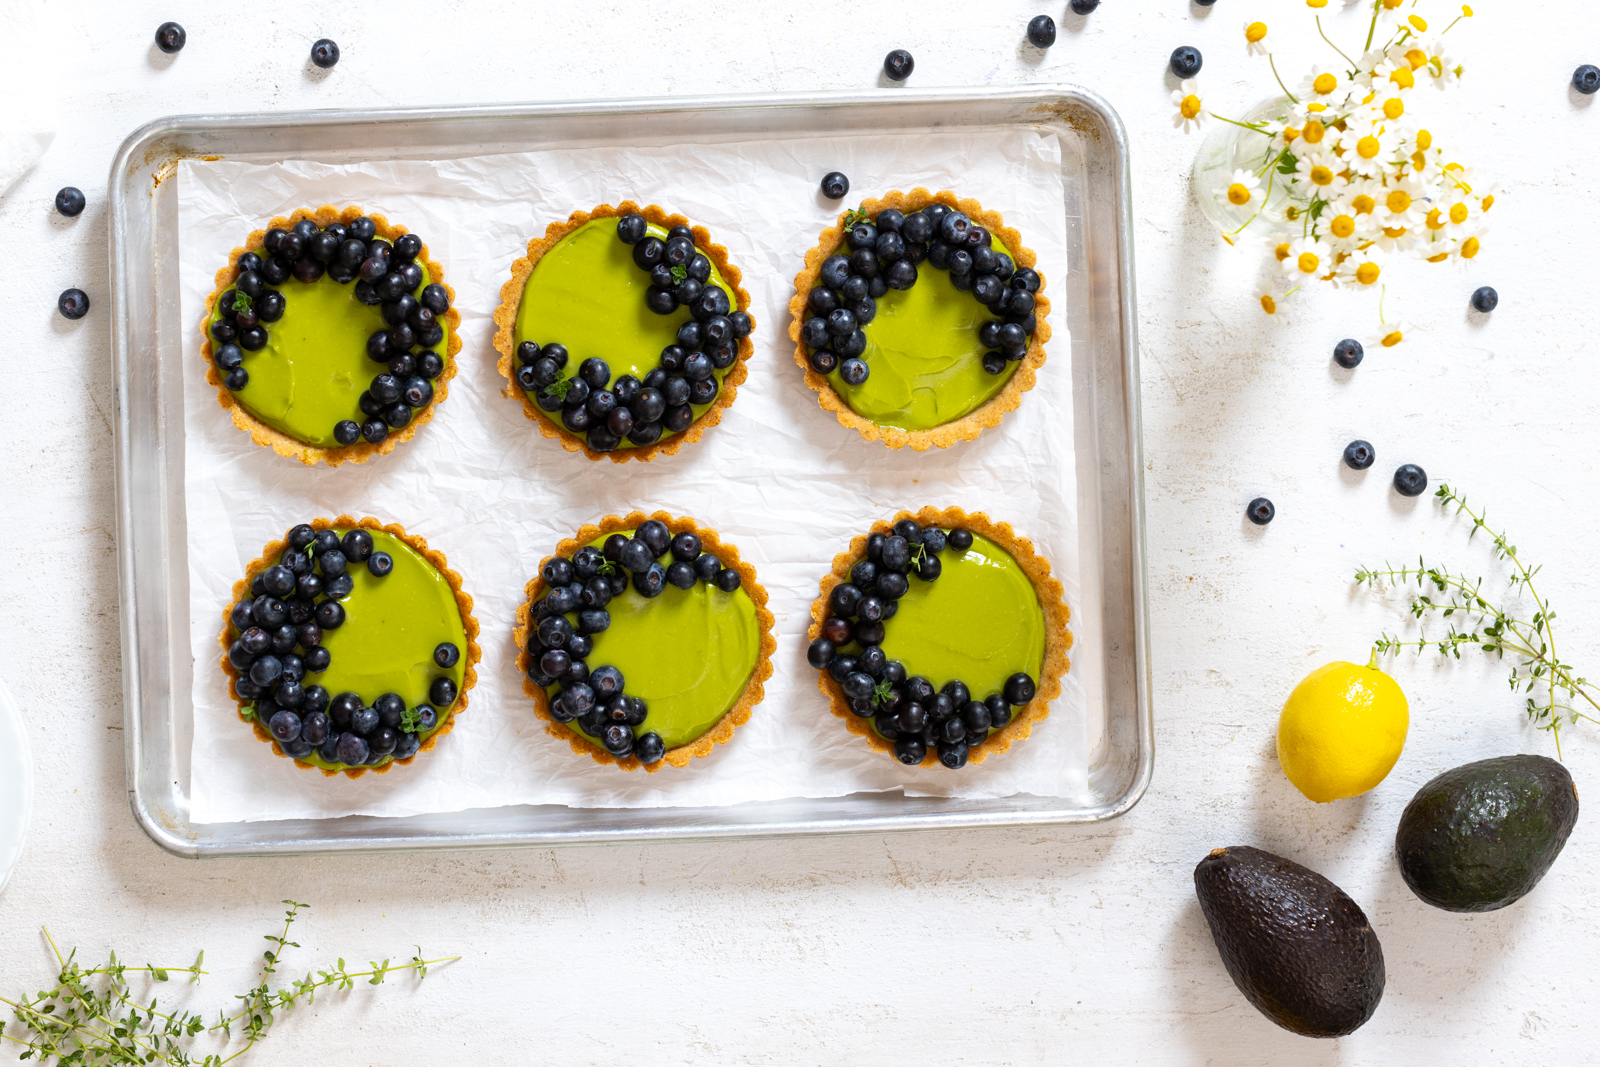 6 sweet little Avocado Blueberry Tarts with Almond Crust. The flavor and texture combo is a dream.